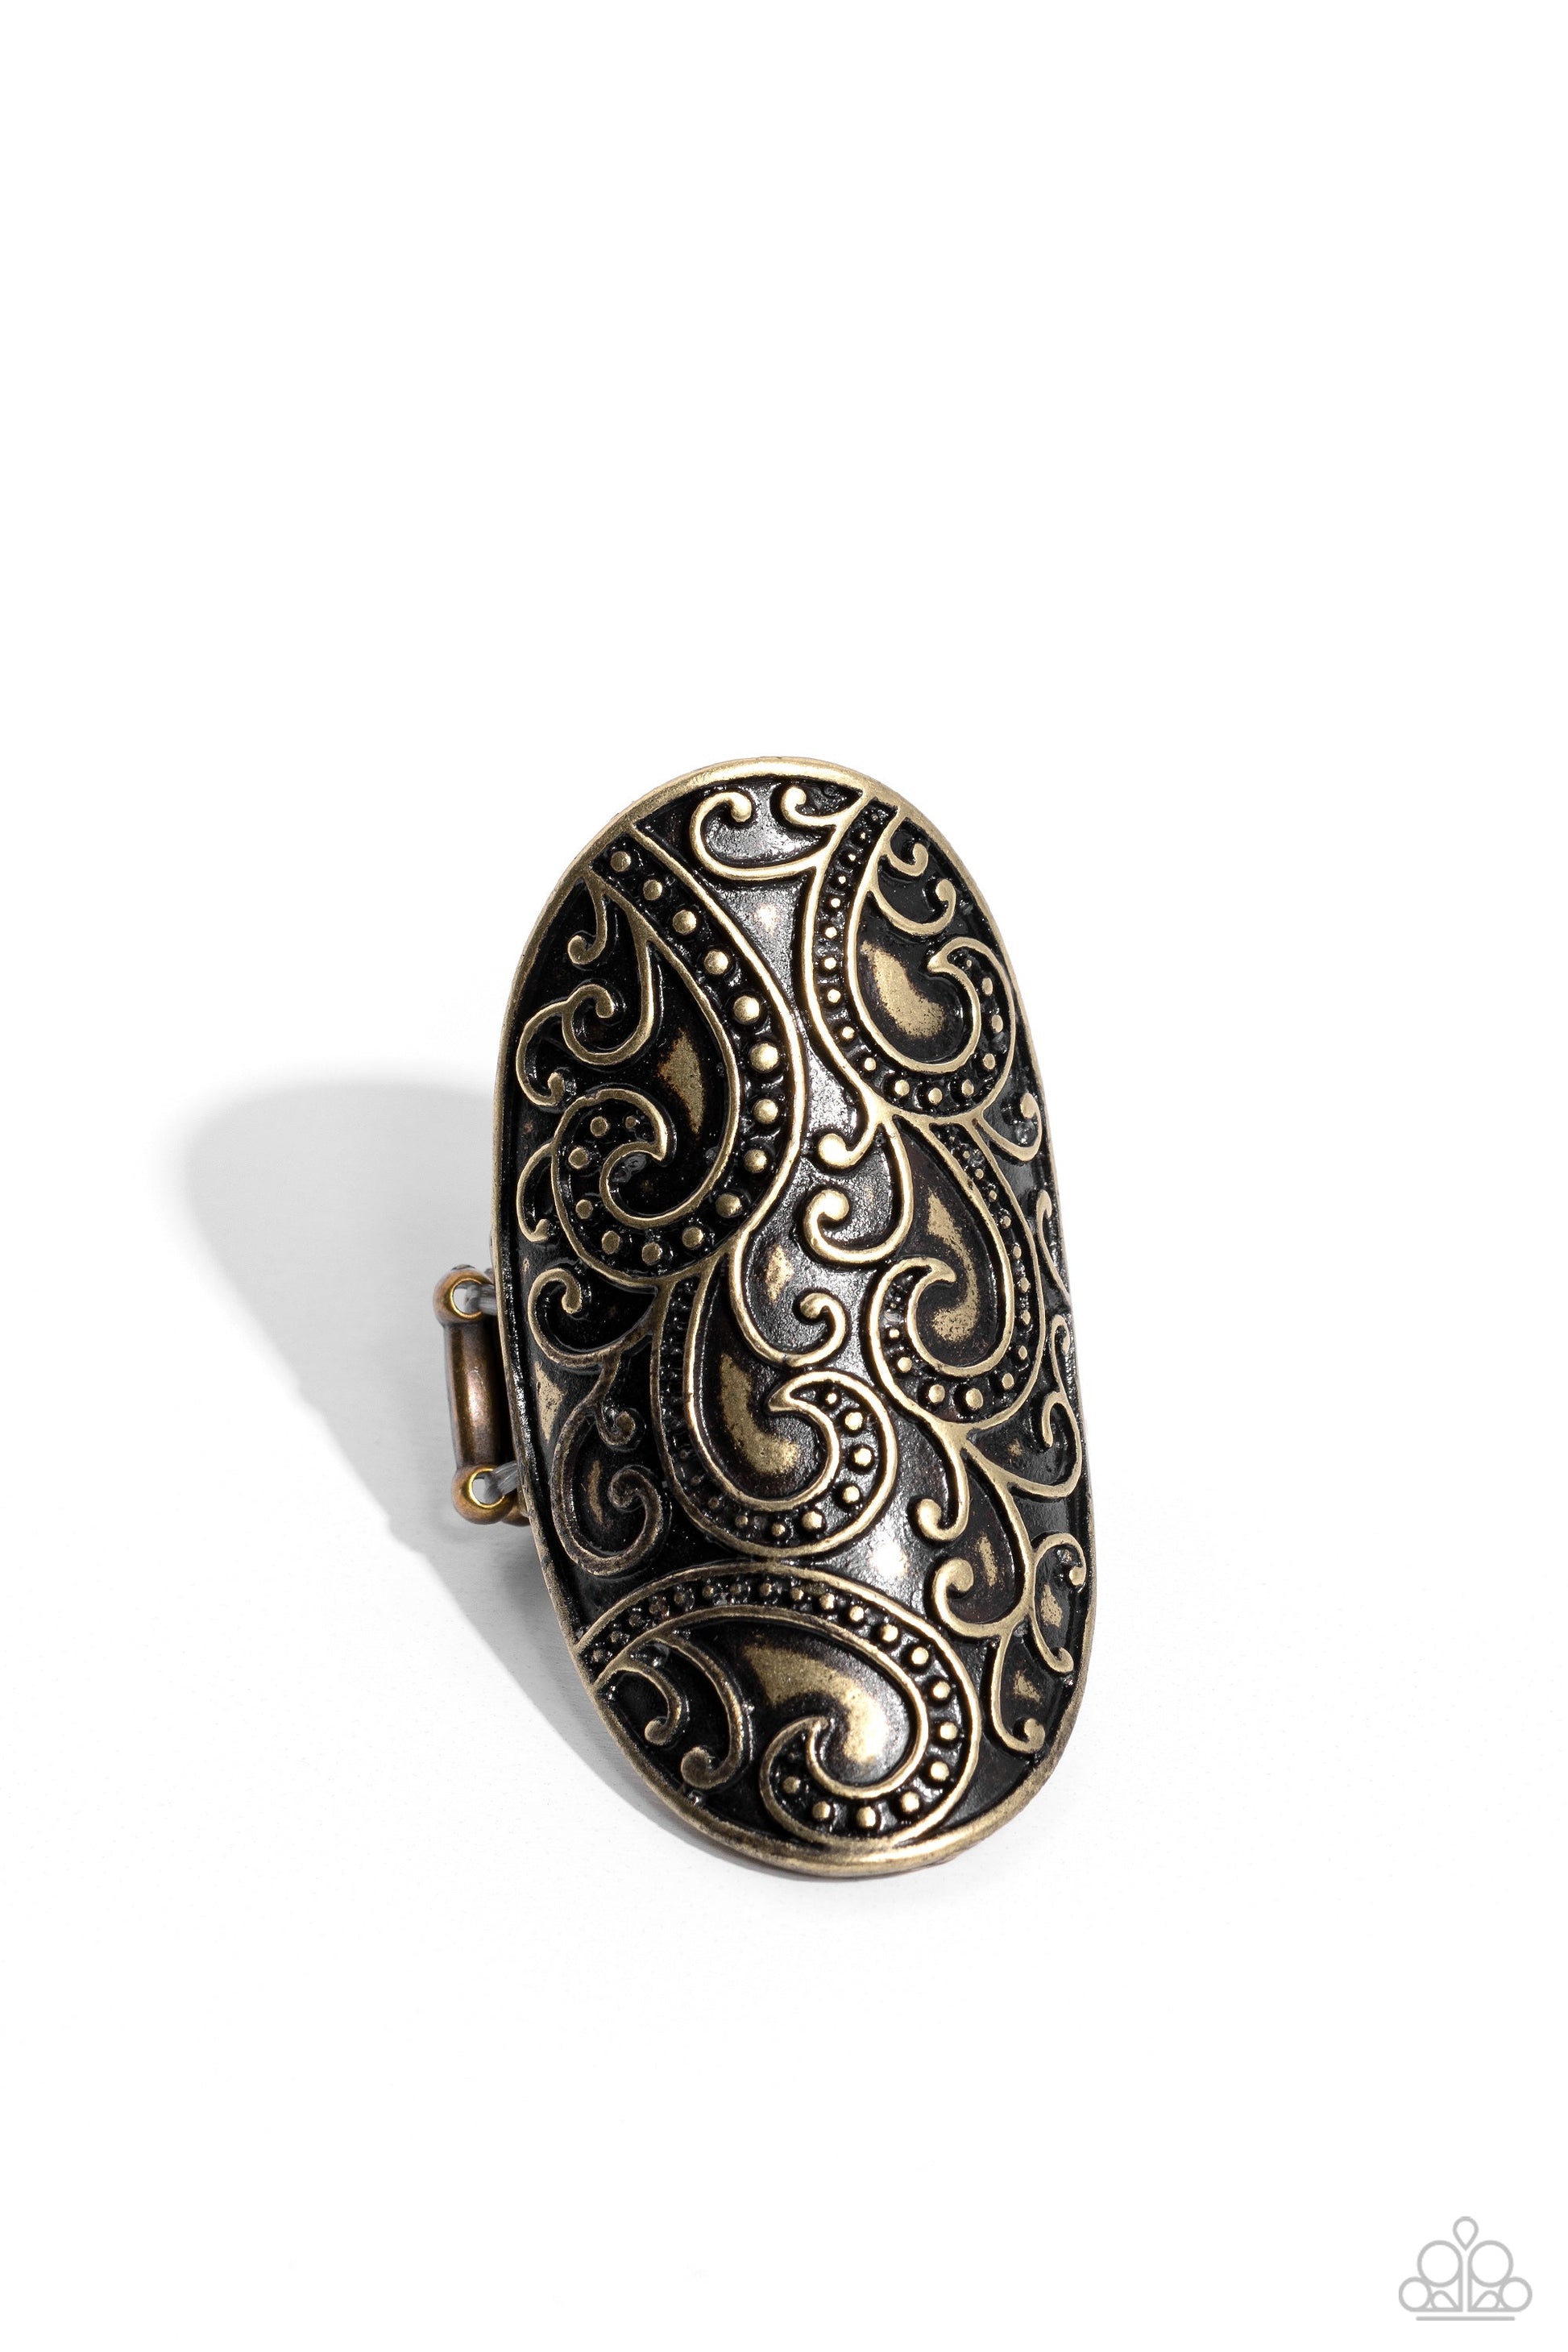 PAISLEY for You - Brass Fashion Ring - Paparazzi Accessories - Embossed in a studded paisley pattern, a thick brass frame folds around the finger for a whimsically vintage look. Features a stretchy band for a flexible fit. Sold as one individual ring.